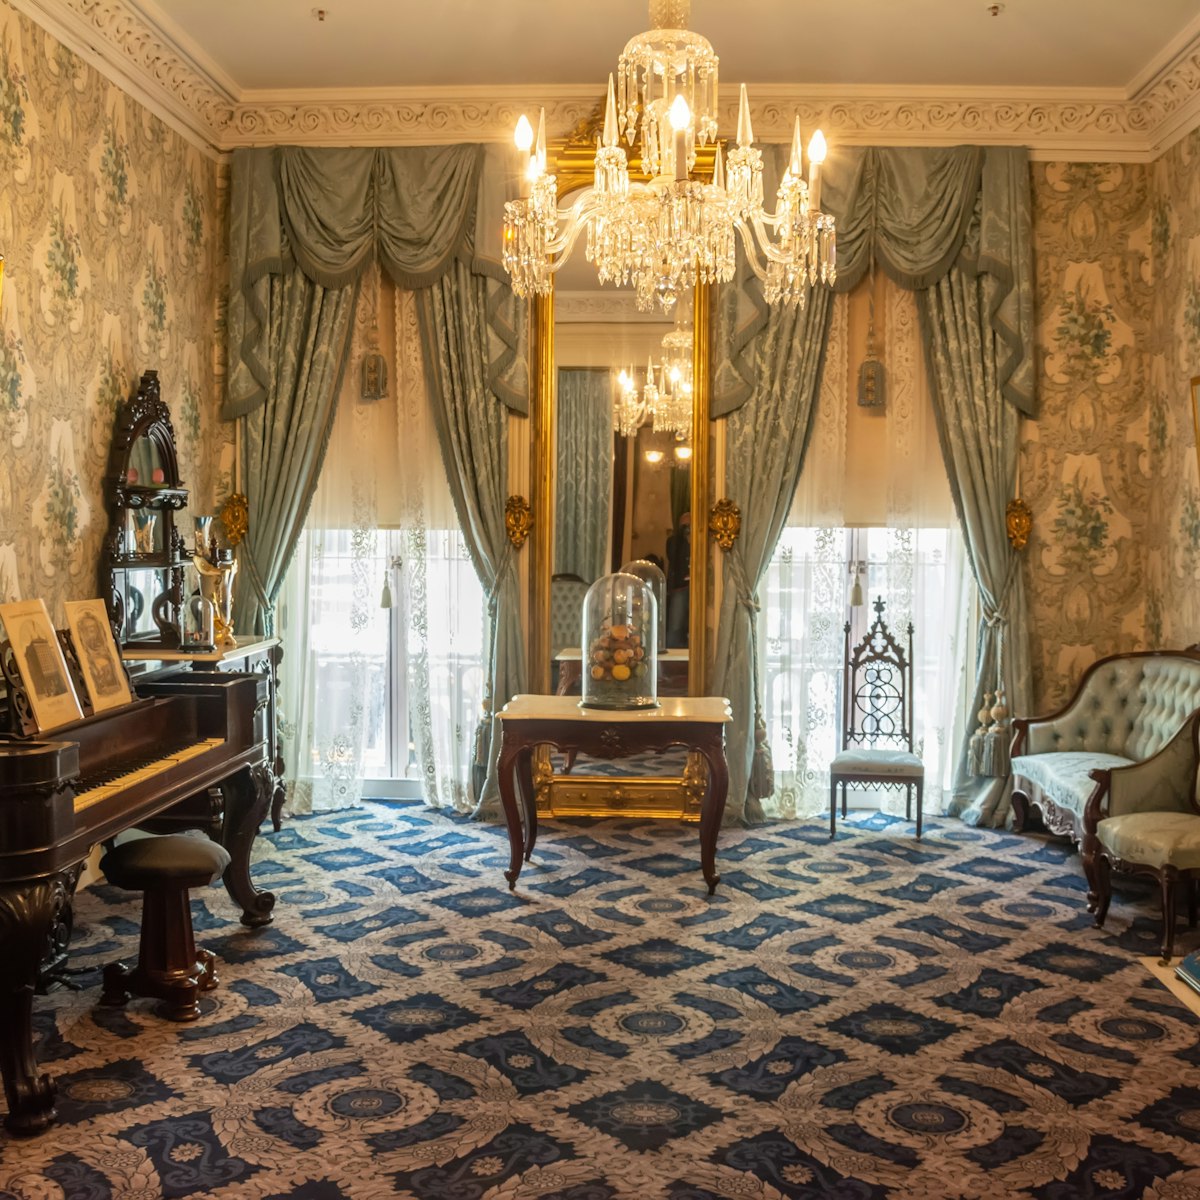 The Parlor of the Theodore Roosevelt Birthplace historic site at 28 E 20th Street in New York City. 